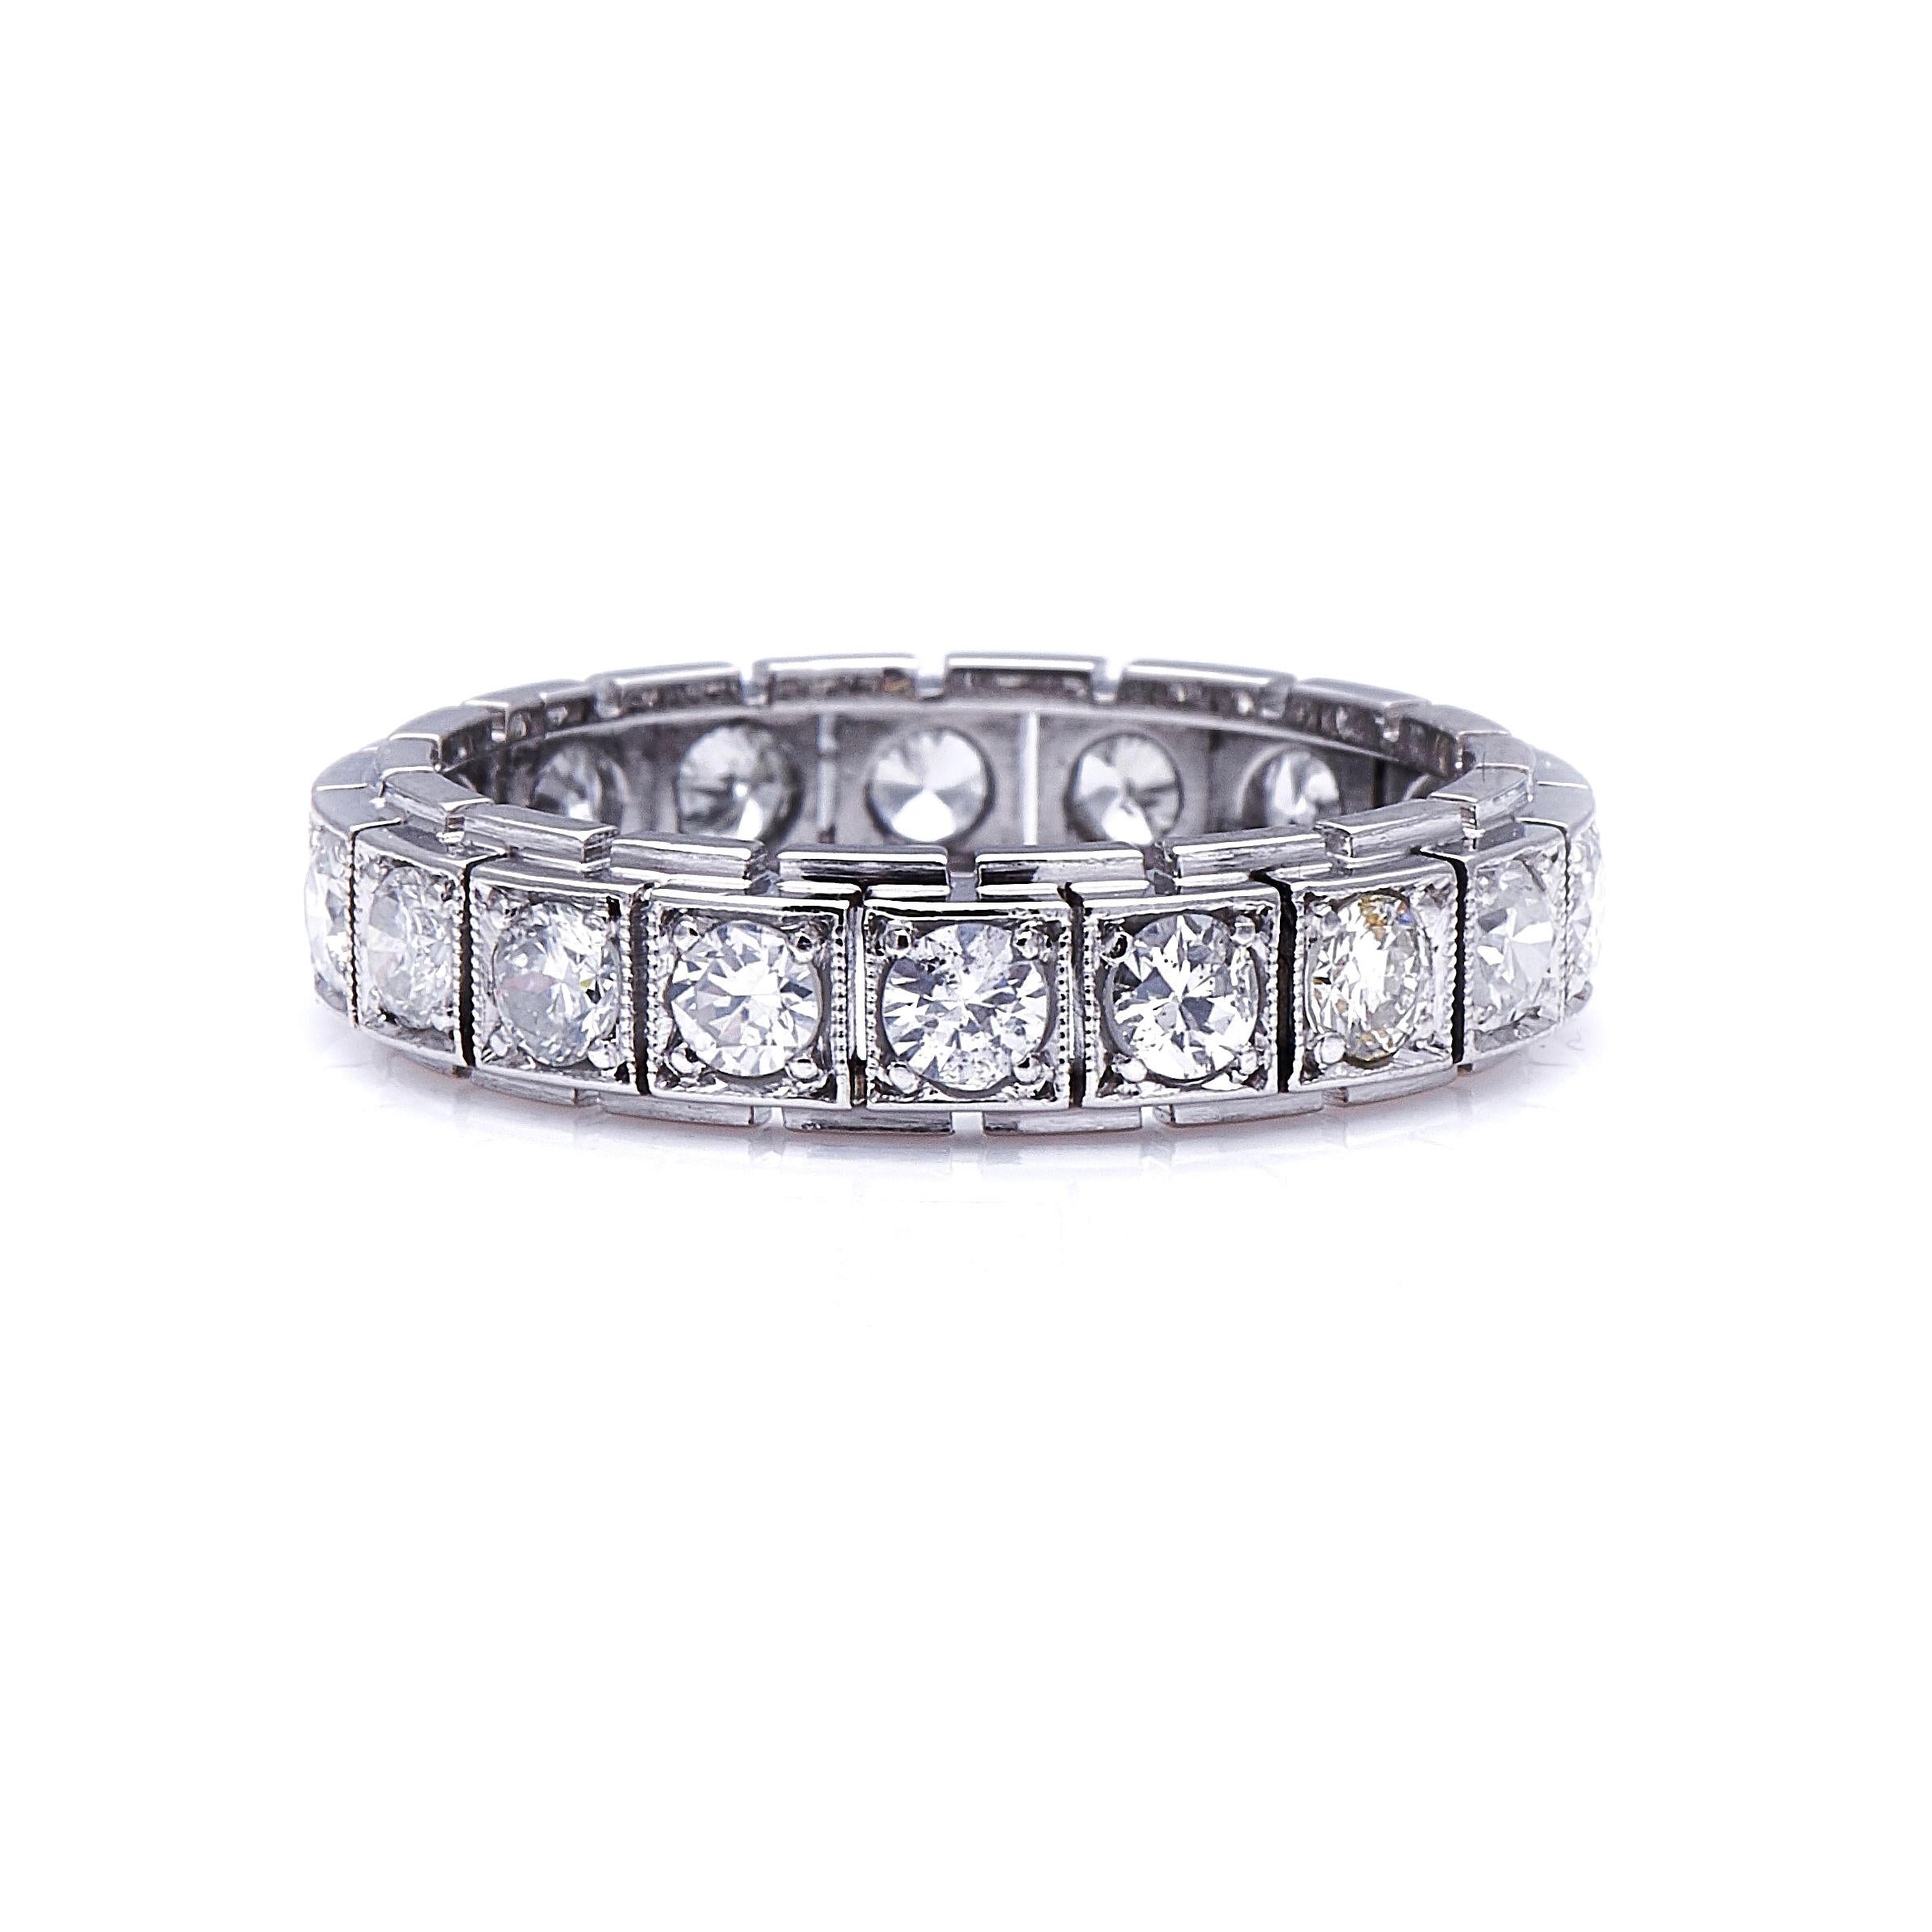 Diamond eternity ring, 1930s. Diamond eternity rings are so-called because they are set with a continuous band of diamonds, and symbolise never-ending love. This example is unusual for its segmented construction and its square millegrained borders